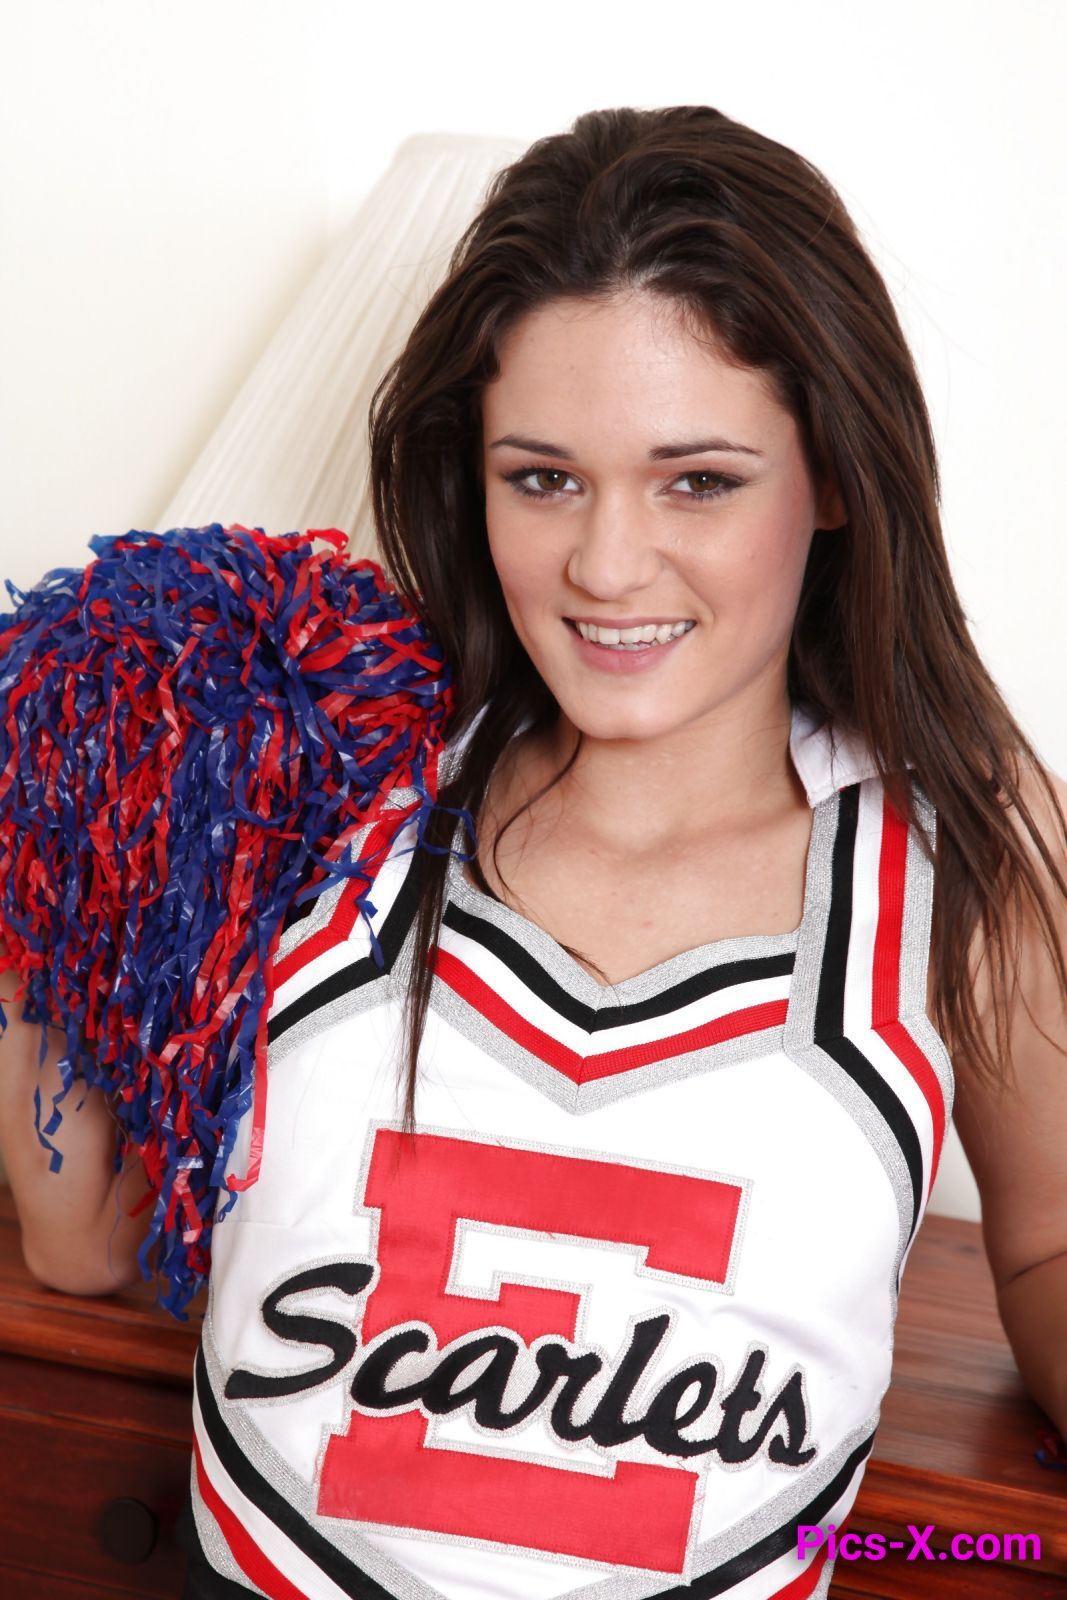 Darling Brunette Cheerleader Shows Off Perky Tits and Shaved Pussy - Schoolgirl Internal - Image 15